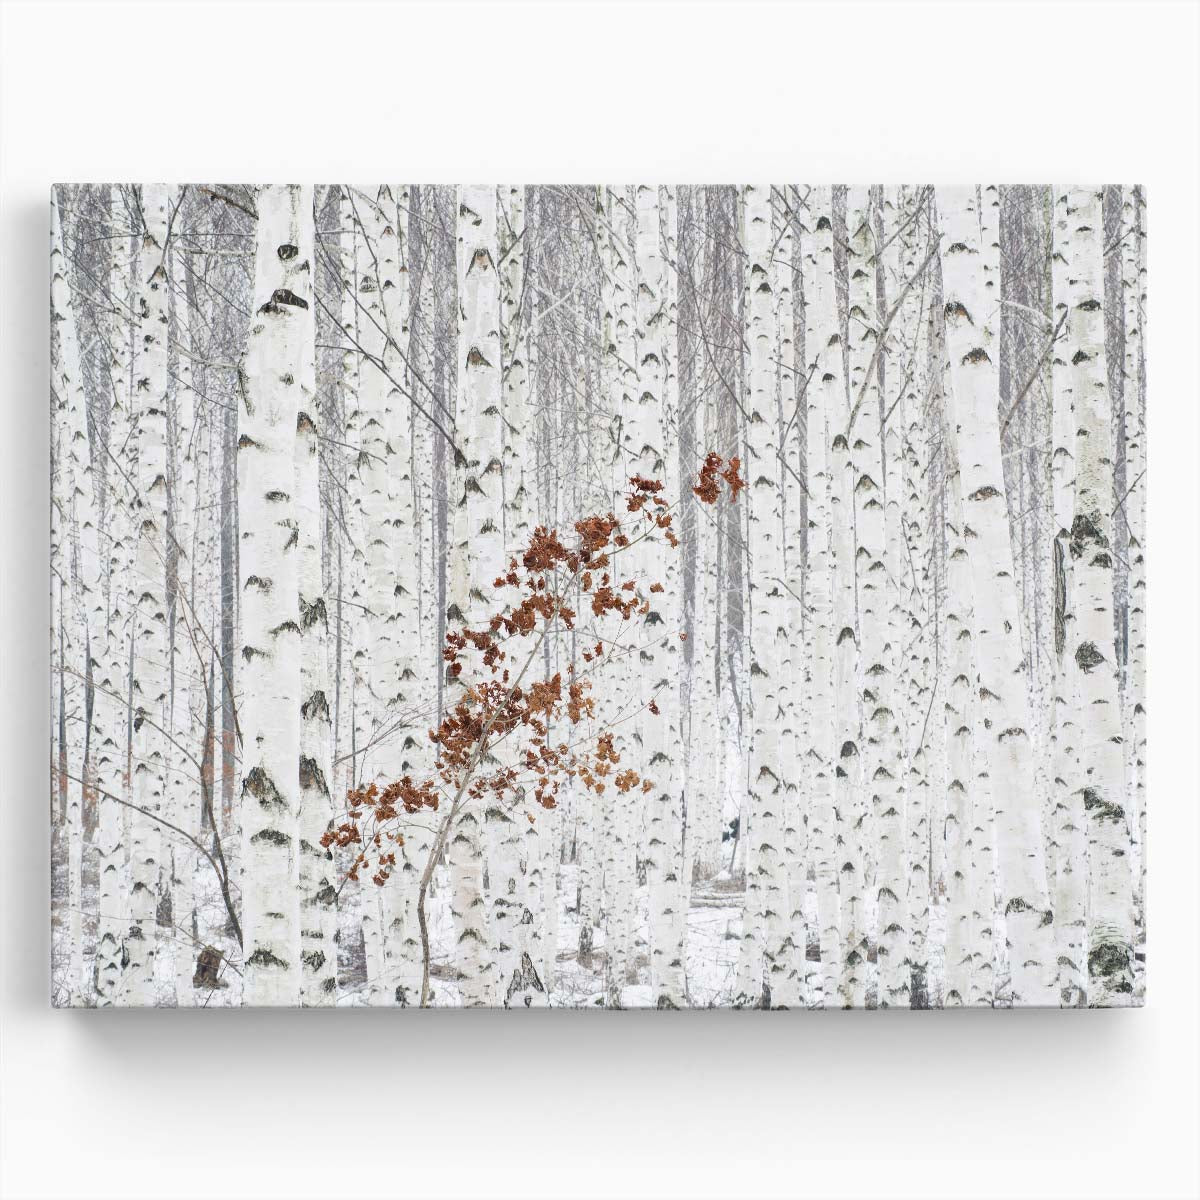 White Birch Forest Autumn Landscape Photography Wall Art by Luxuriance Designs. Made in USA.